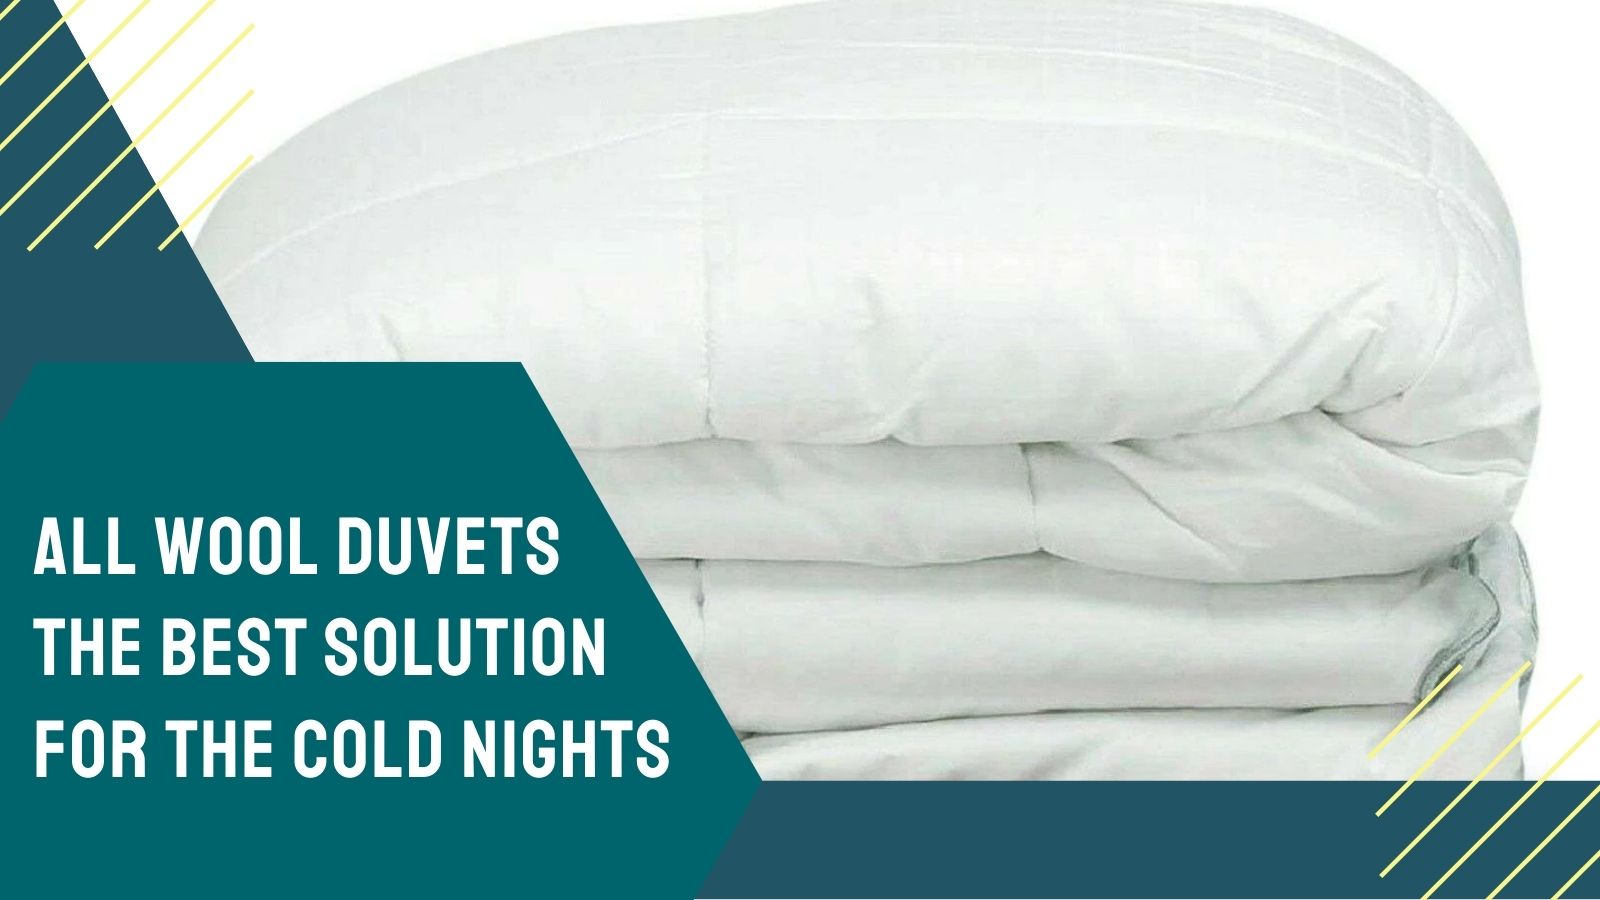 All Wool Duvets: The Best Solution For The Cold Nights